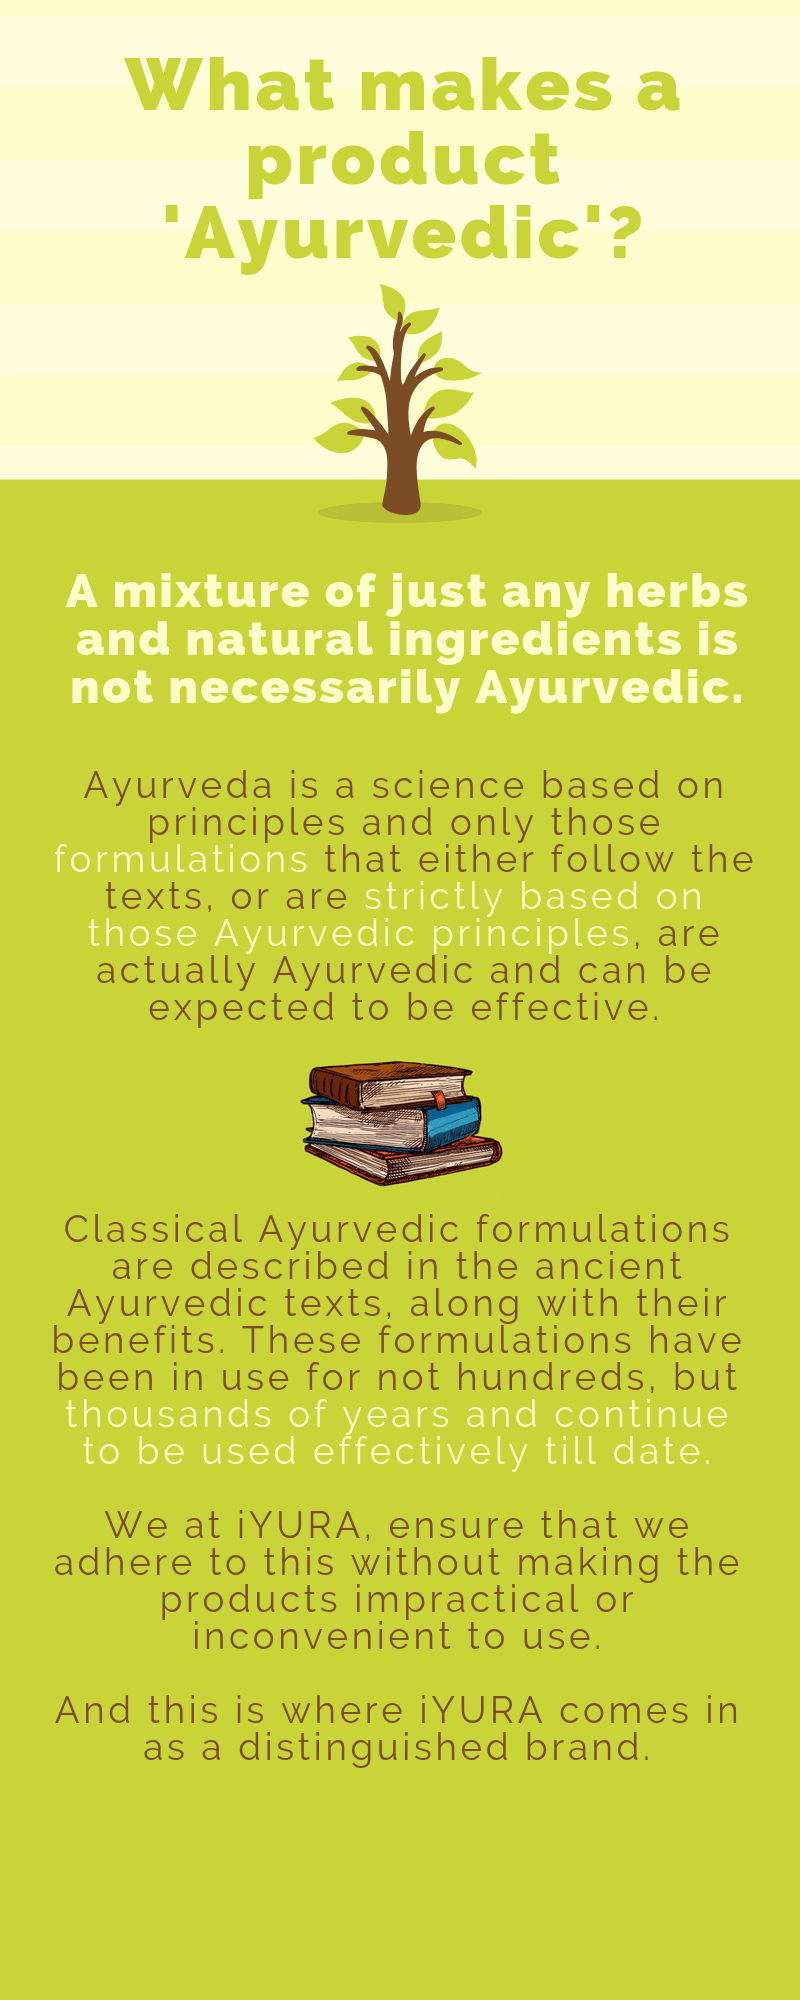 An image showing what makes a product ayurvedic_1